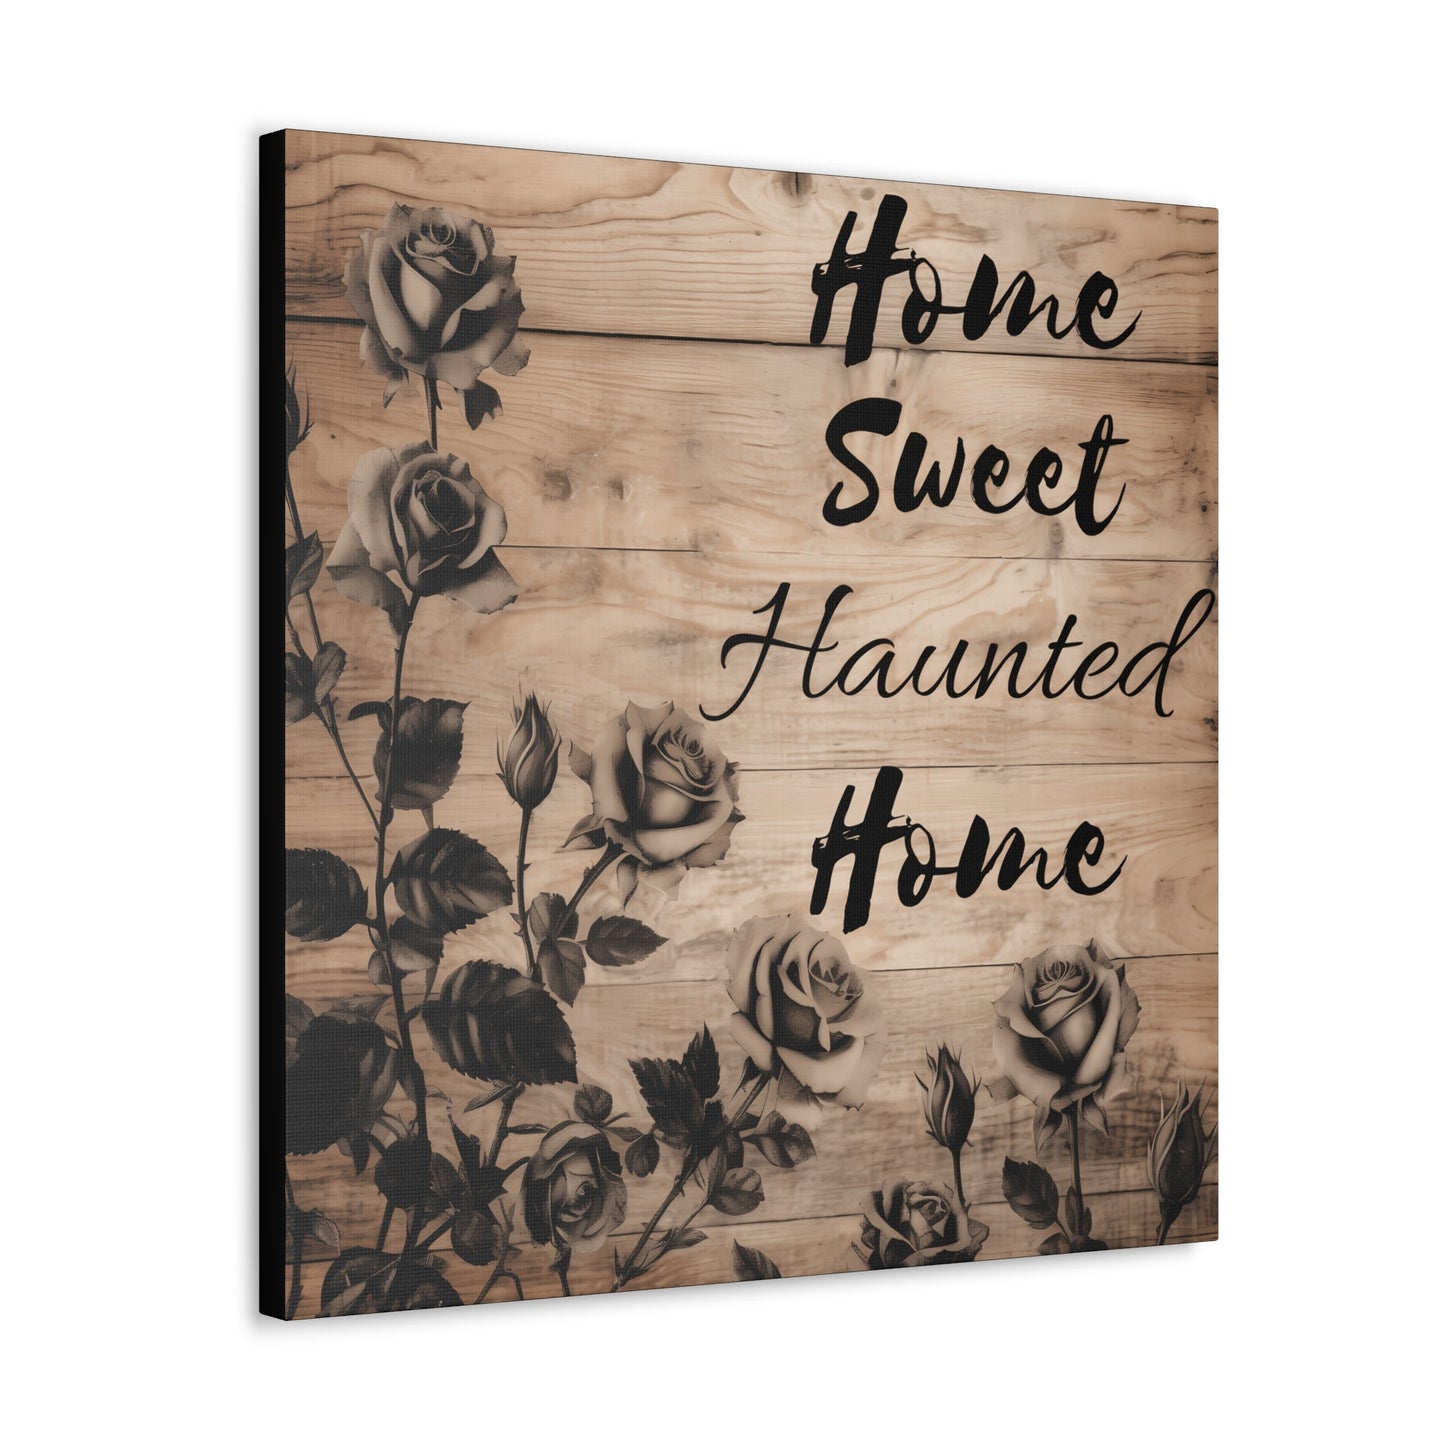 Home Sweet Haunted Home Black Roses Canvas Gallery WrapCanvasVTZdesigns24″ x 24″1.25"Art & Wall DecorCanvasFall Picks